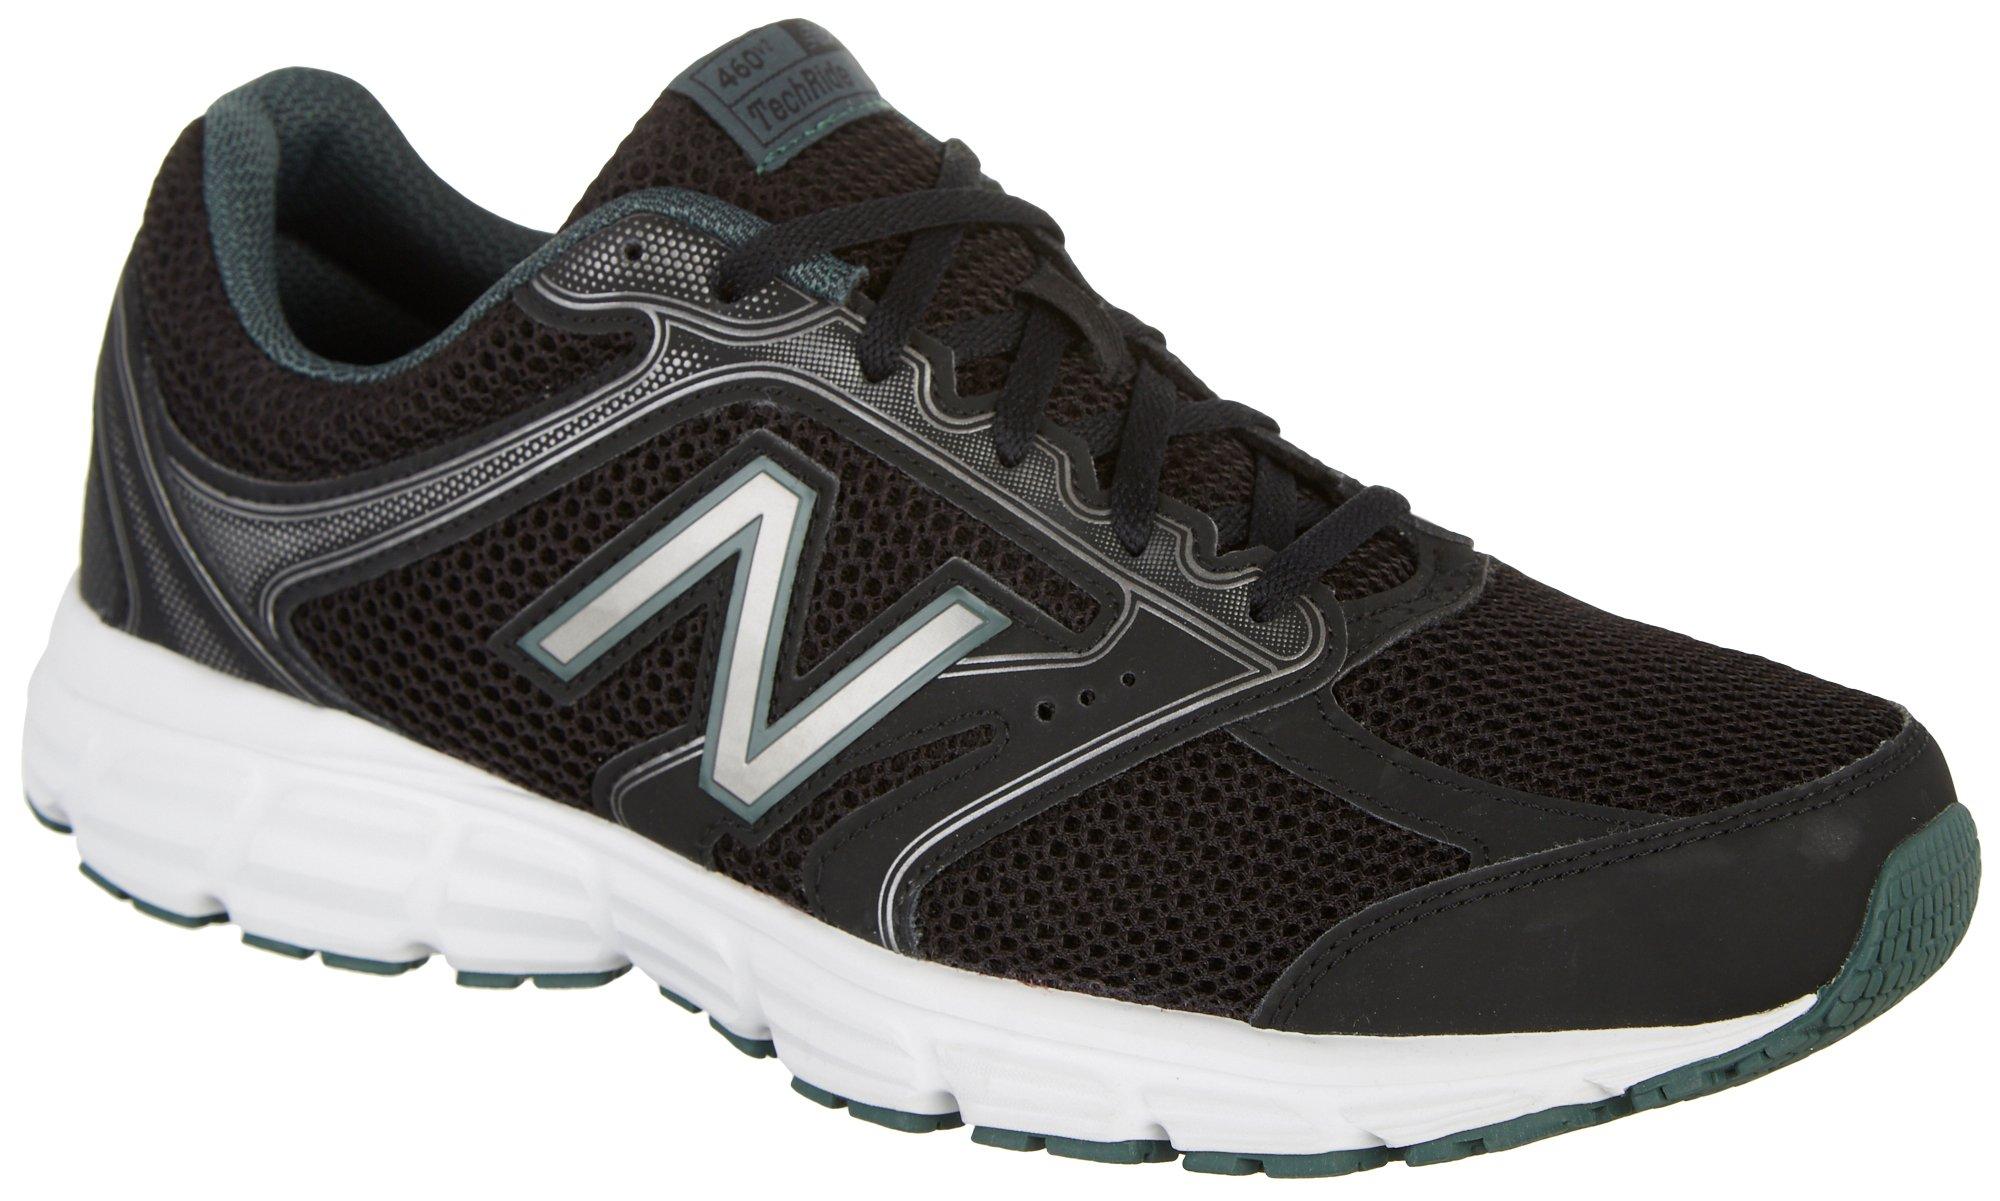 new balance 460 womens running shoes lace up